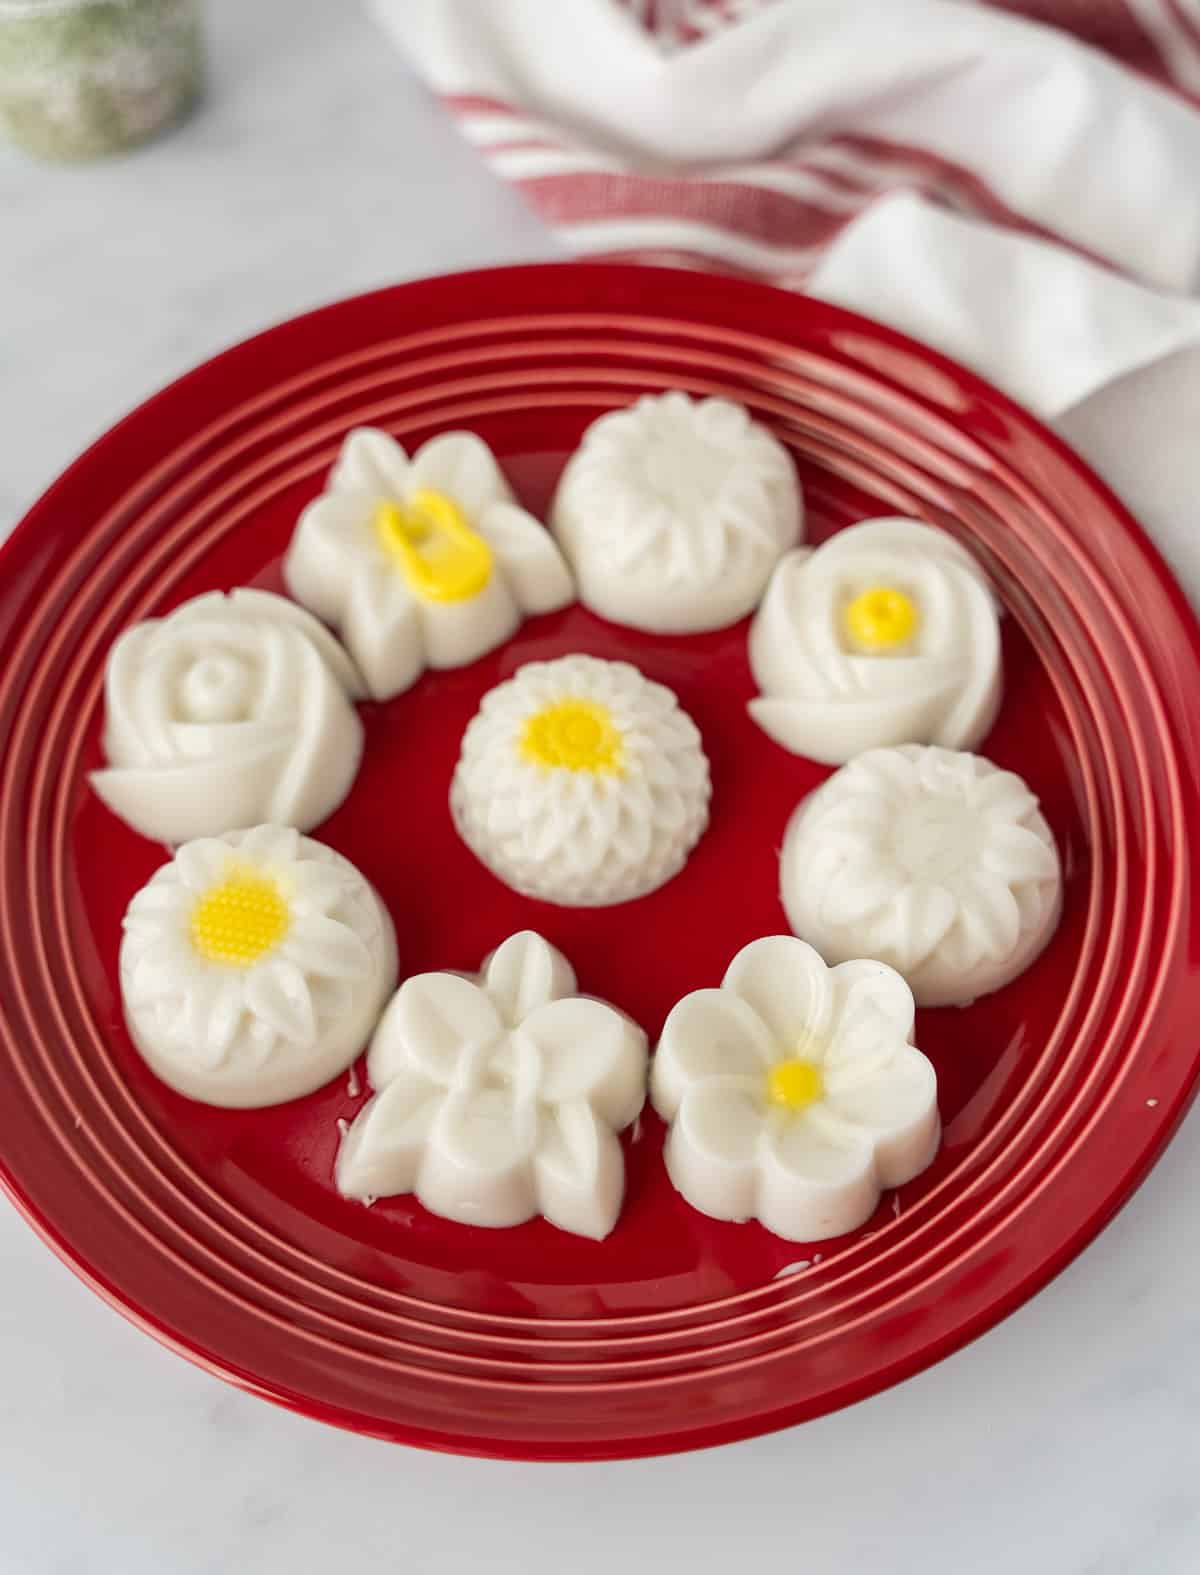 Coconut jelly desserts shaped in flowers on a red round plate.